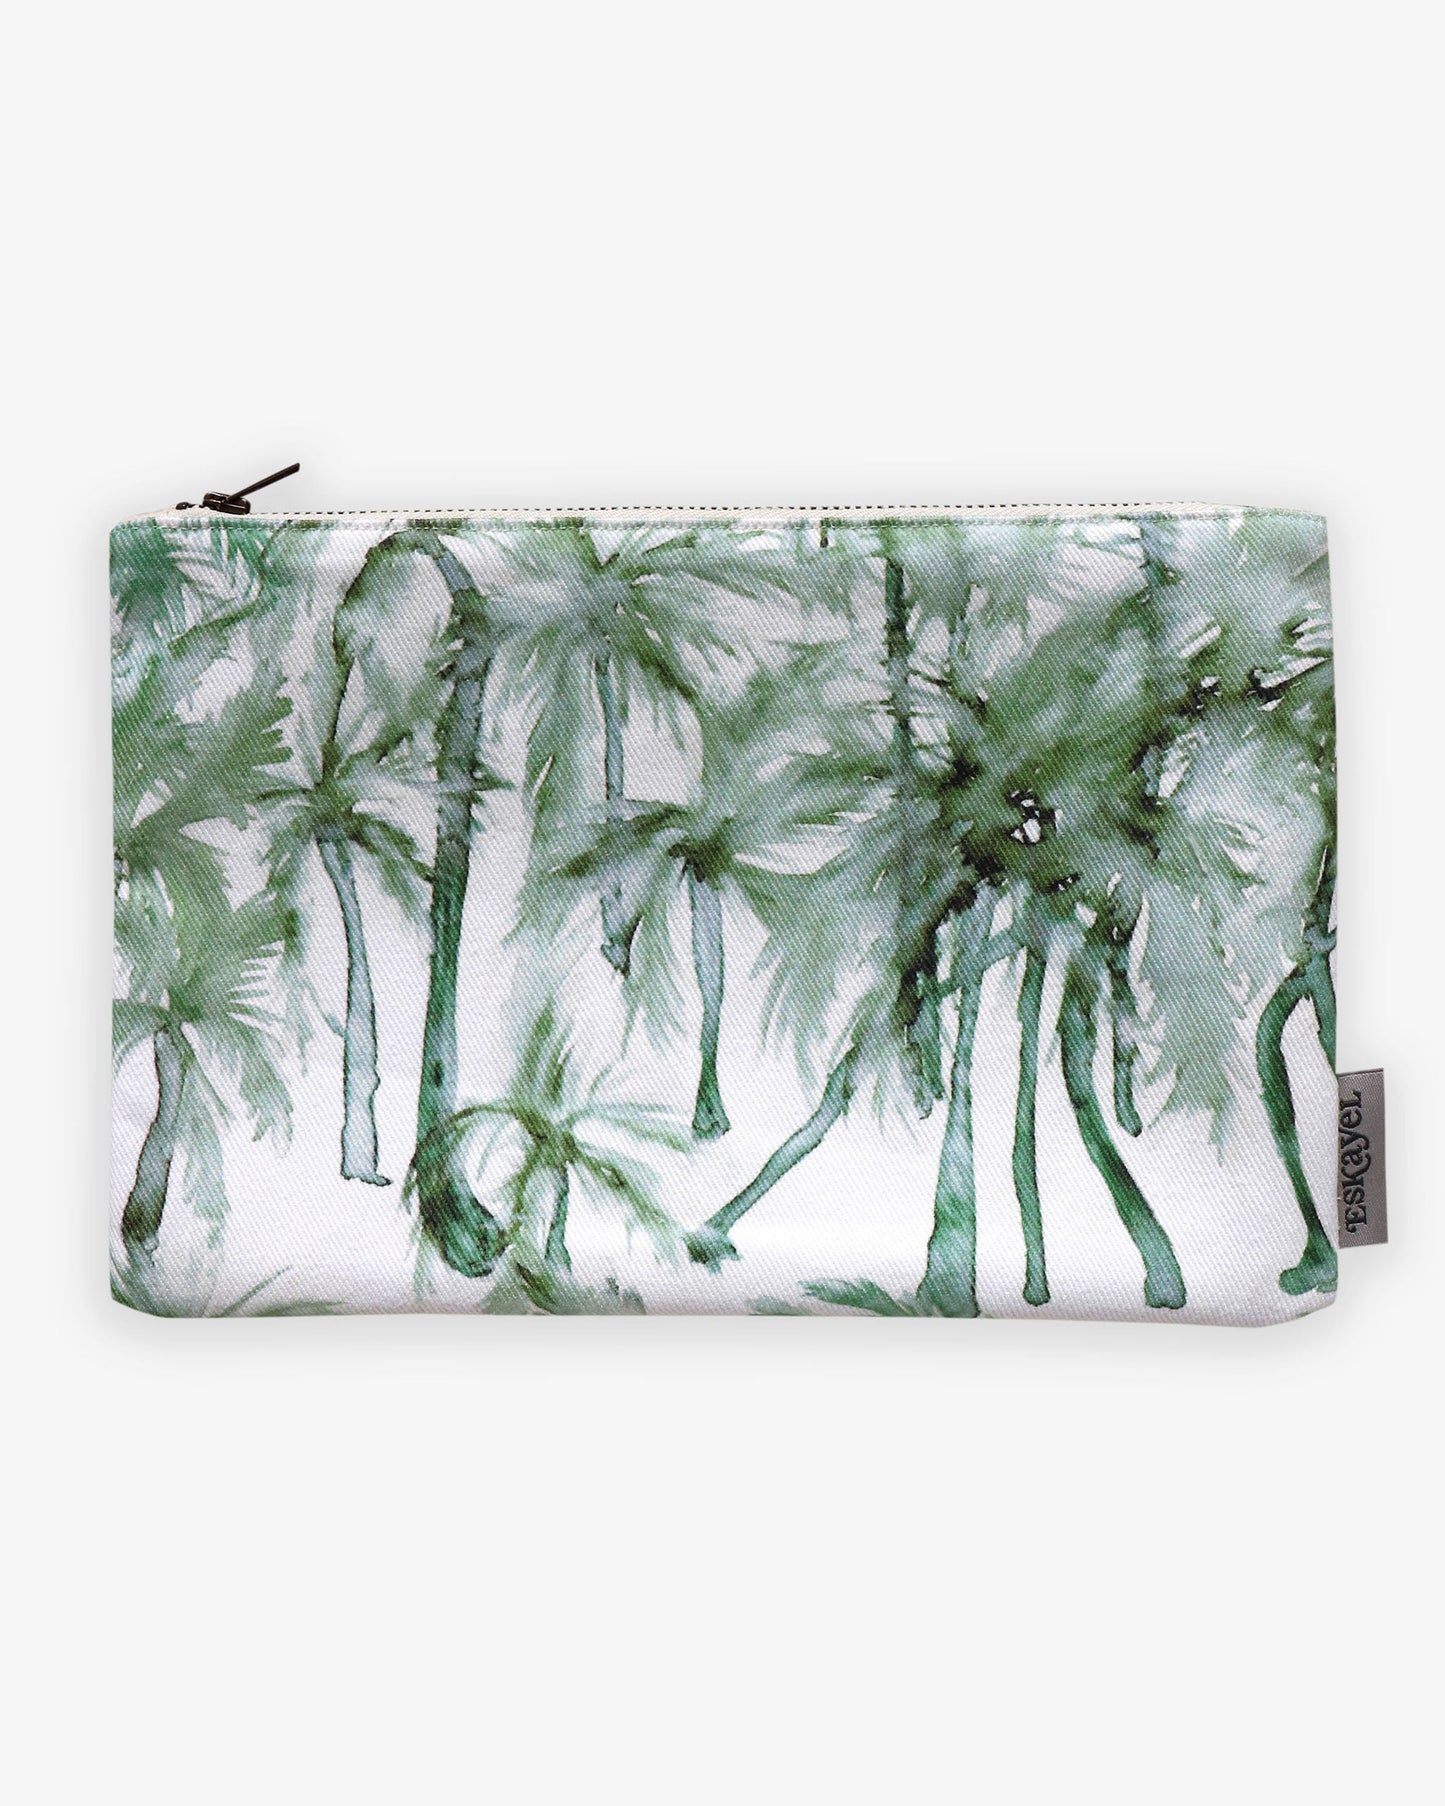 A Palm Dance Pouch perfect for a vacation, with palm trees on it